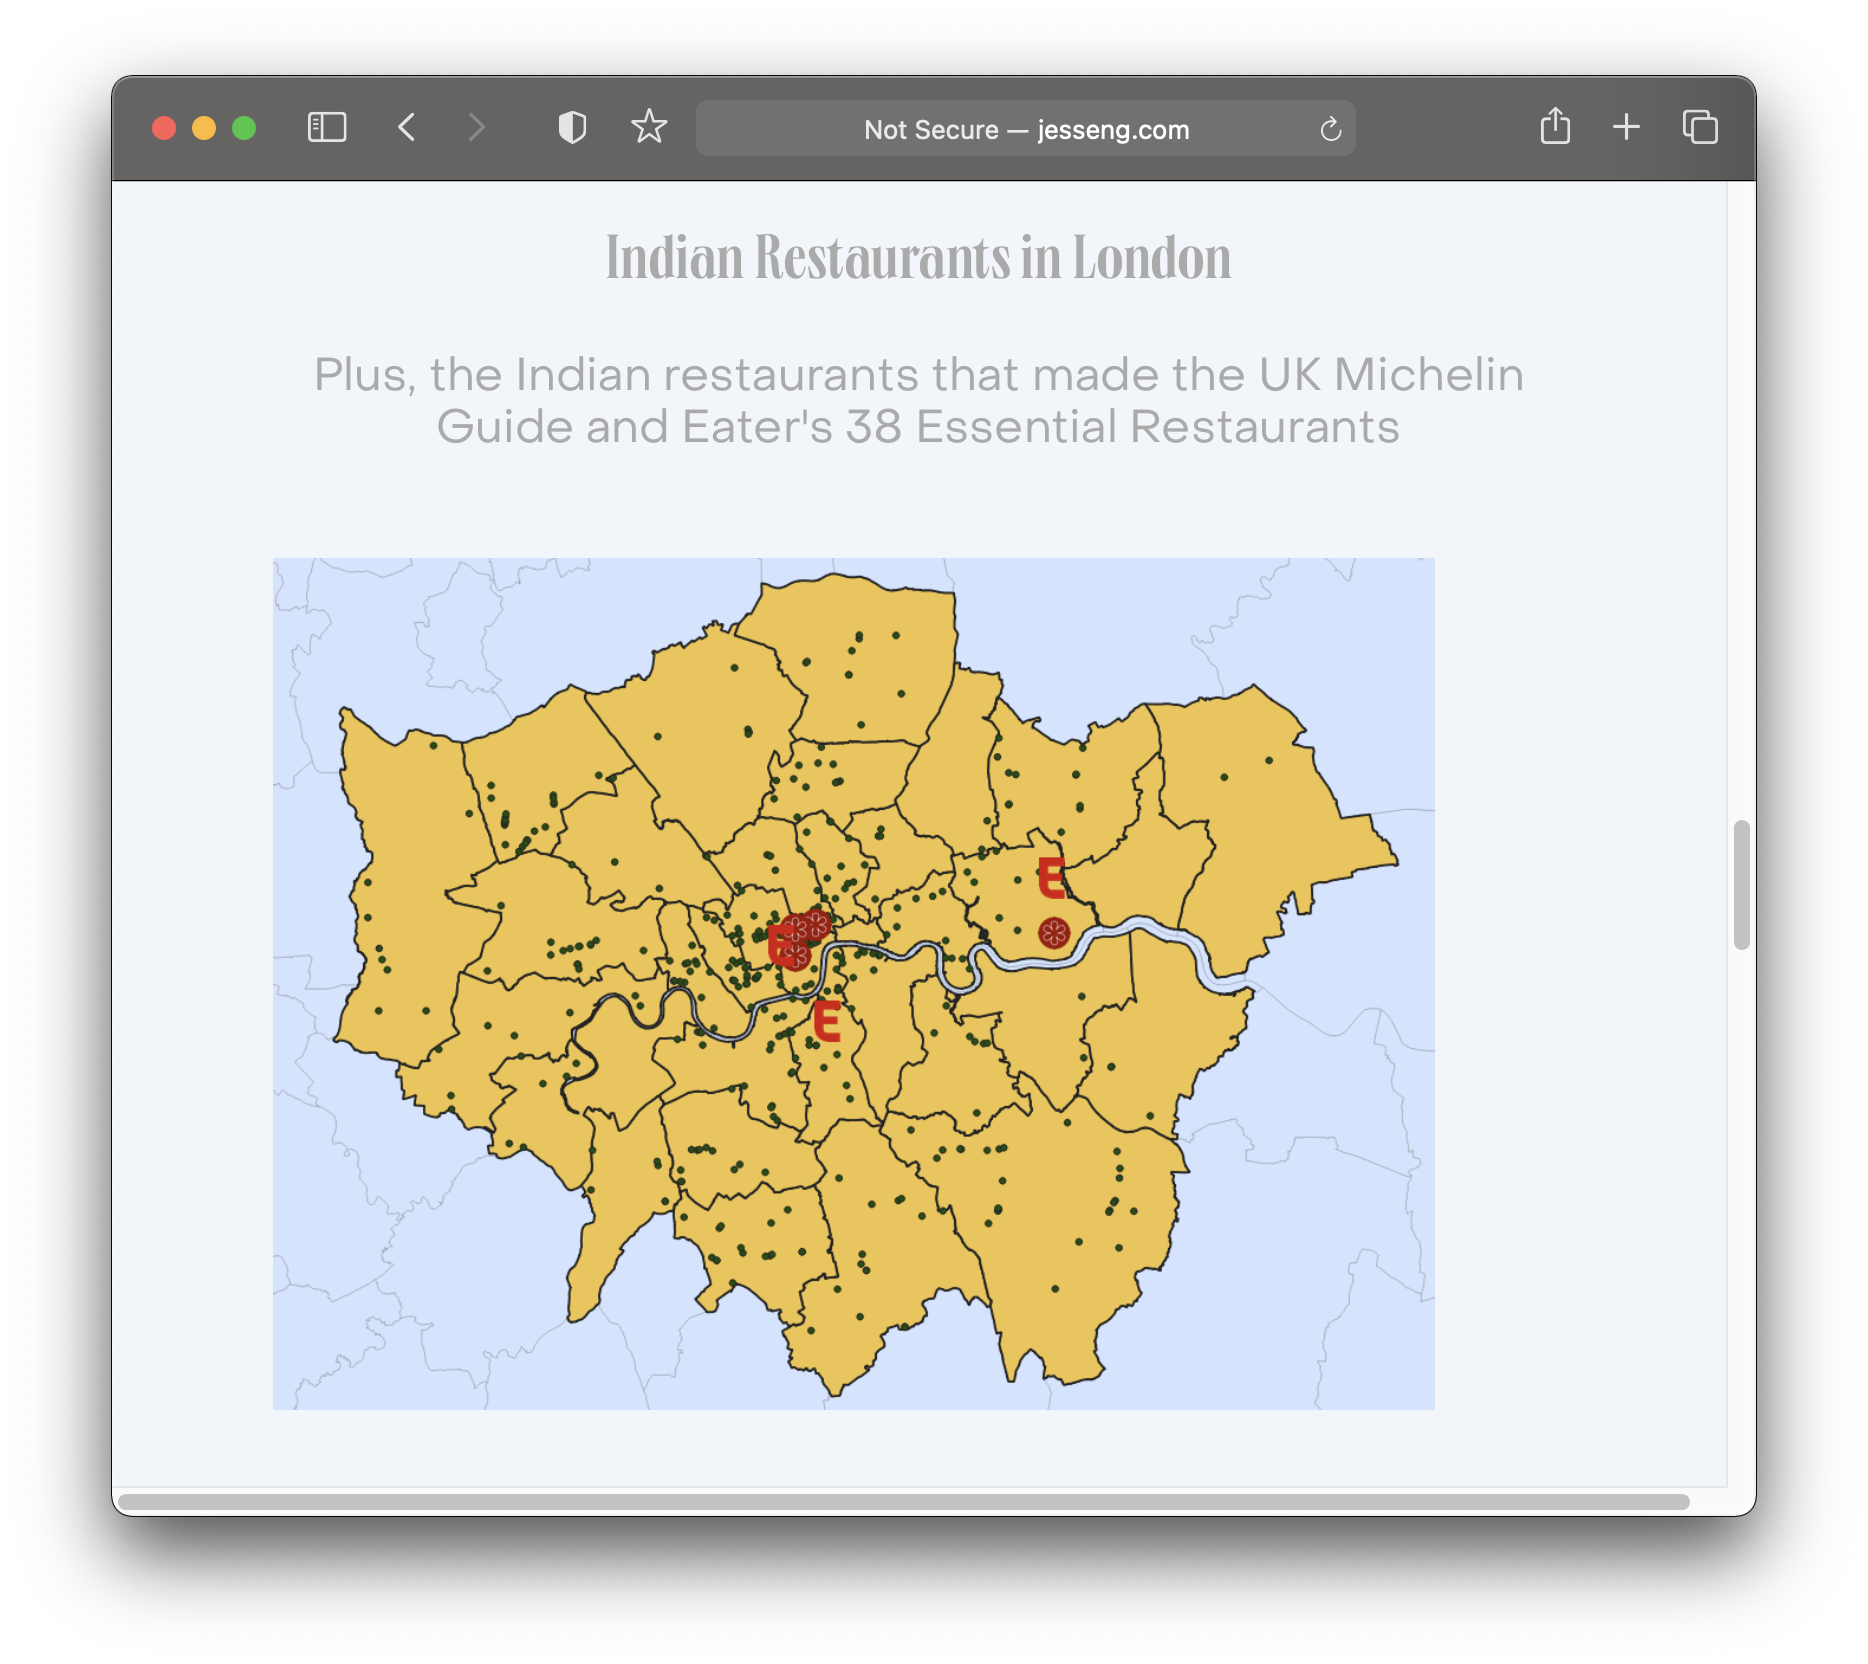 Screenshot of a map of London showing dots which represent Indian restaurants